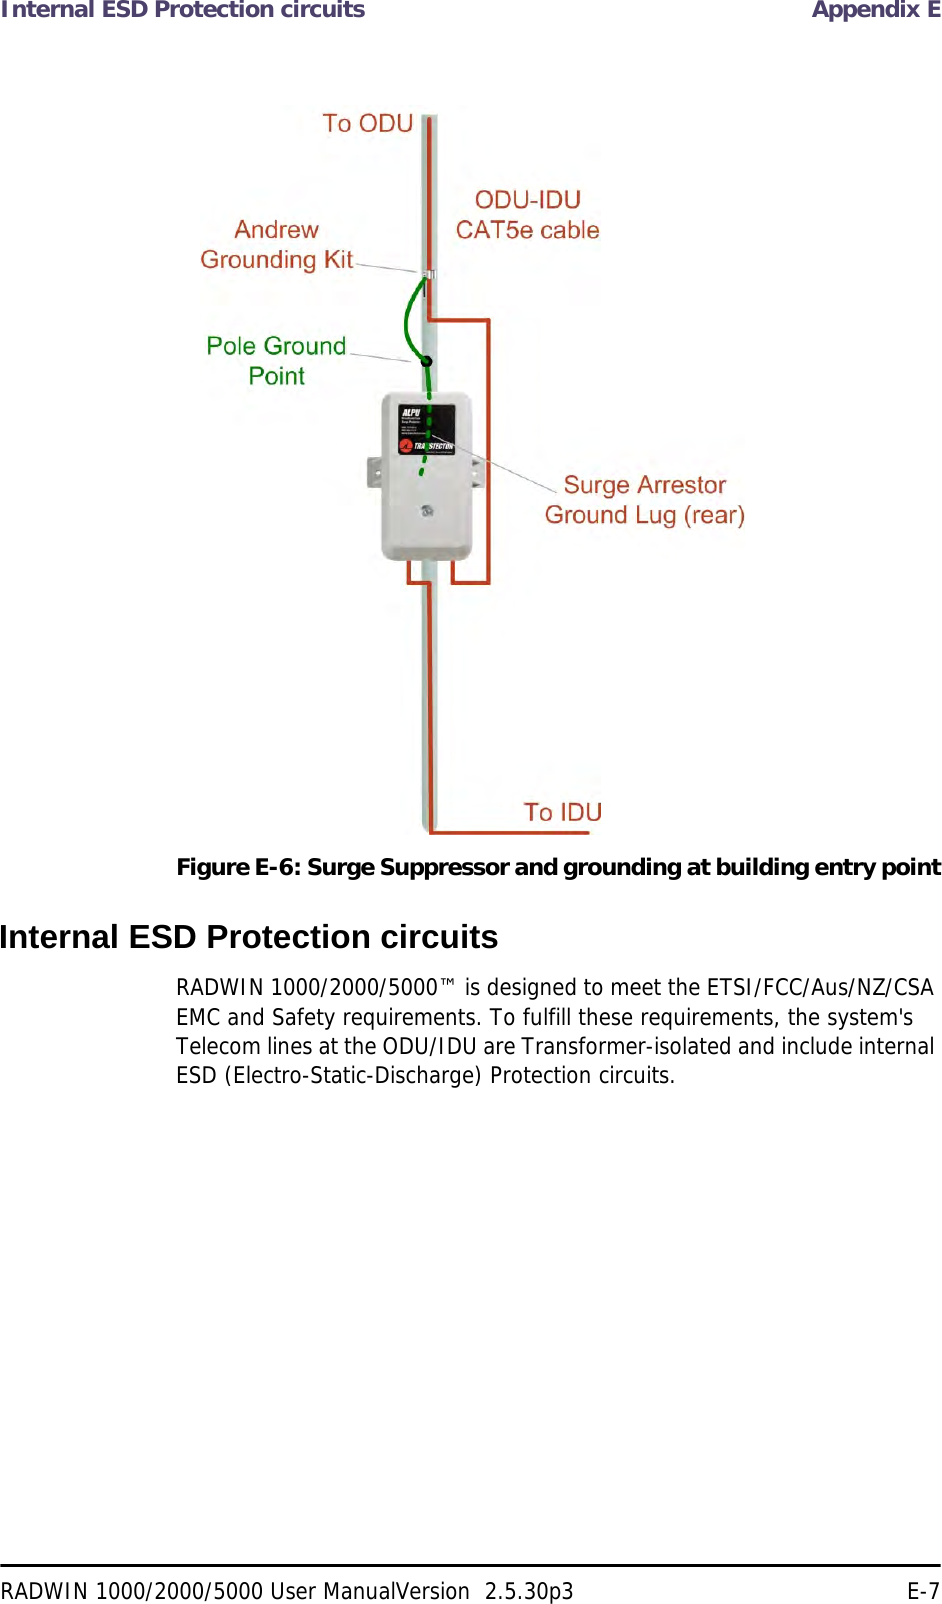 Internal ESD Protection circuits Appendix ERADWIN 1000/2000/5000 User ManualVersion  2.5.30p3 E-7Figure E-6: Surge Suppressor and grounding at building entry pointInternal ESD Protection circuitsRADWIN 1000/2000/5000™ is designed to meet the ETSI/FCC/Aus/NZ/CSA EMC and Safety requirements. To fulfill these requirements, the system&apos;s Telecom lines at the ODU/IDU are Transformer-isolated and include internal ESD (Electro-Static-Discharge) Protection circuits.